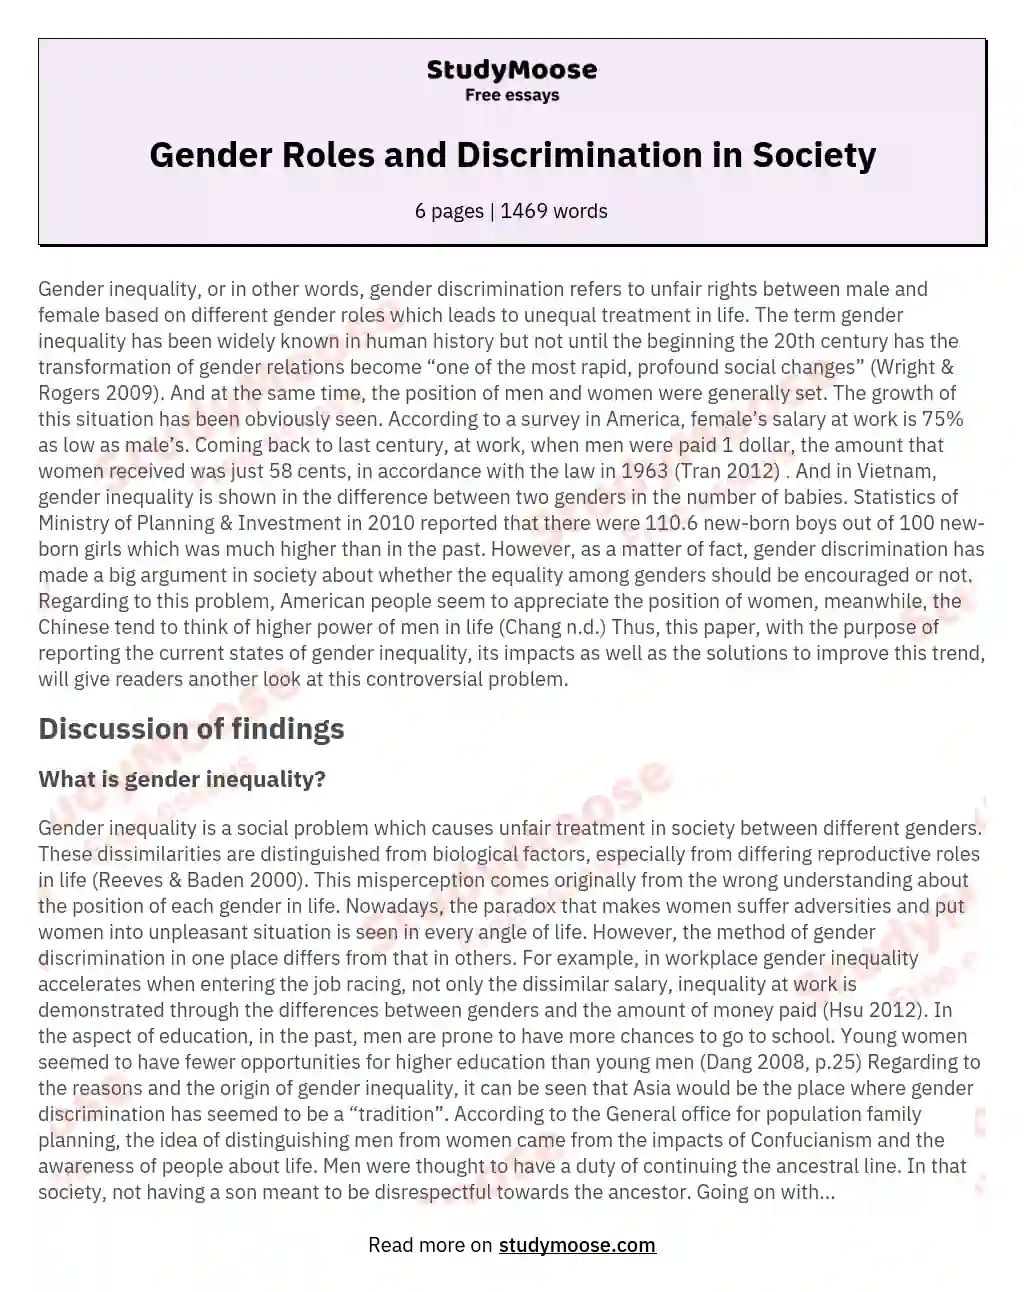 Gender Roles and Discrimination in Society essay